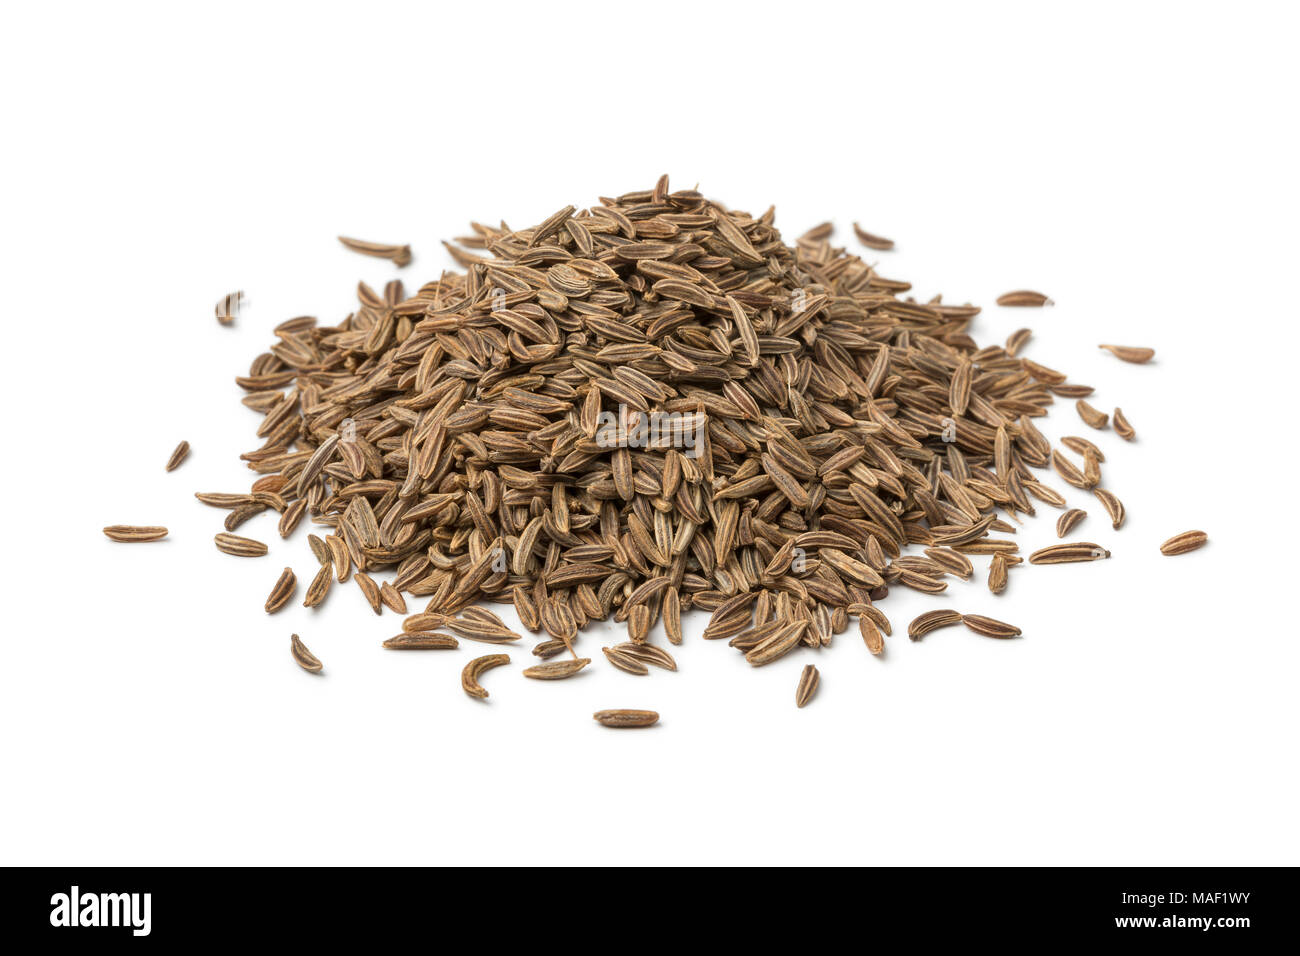 Heap of Caraway seeds isolated on white background Stock Photo